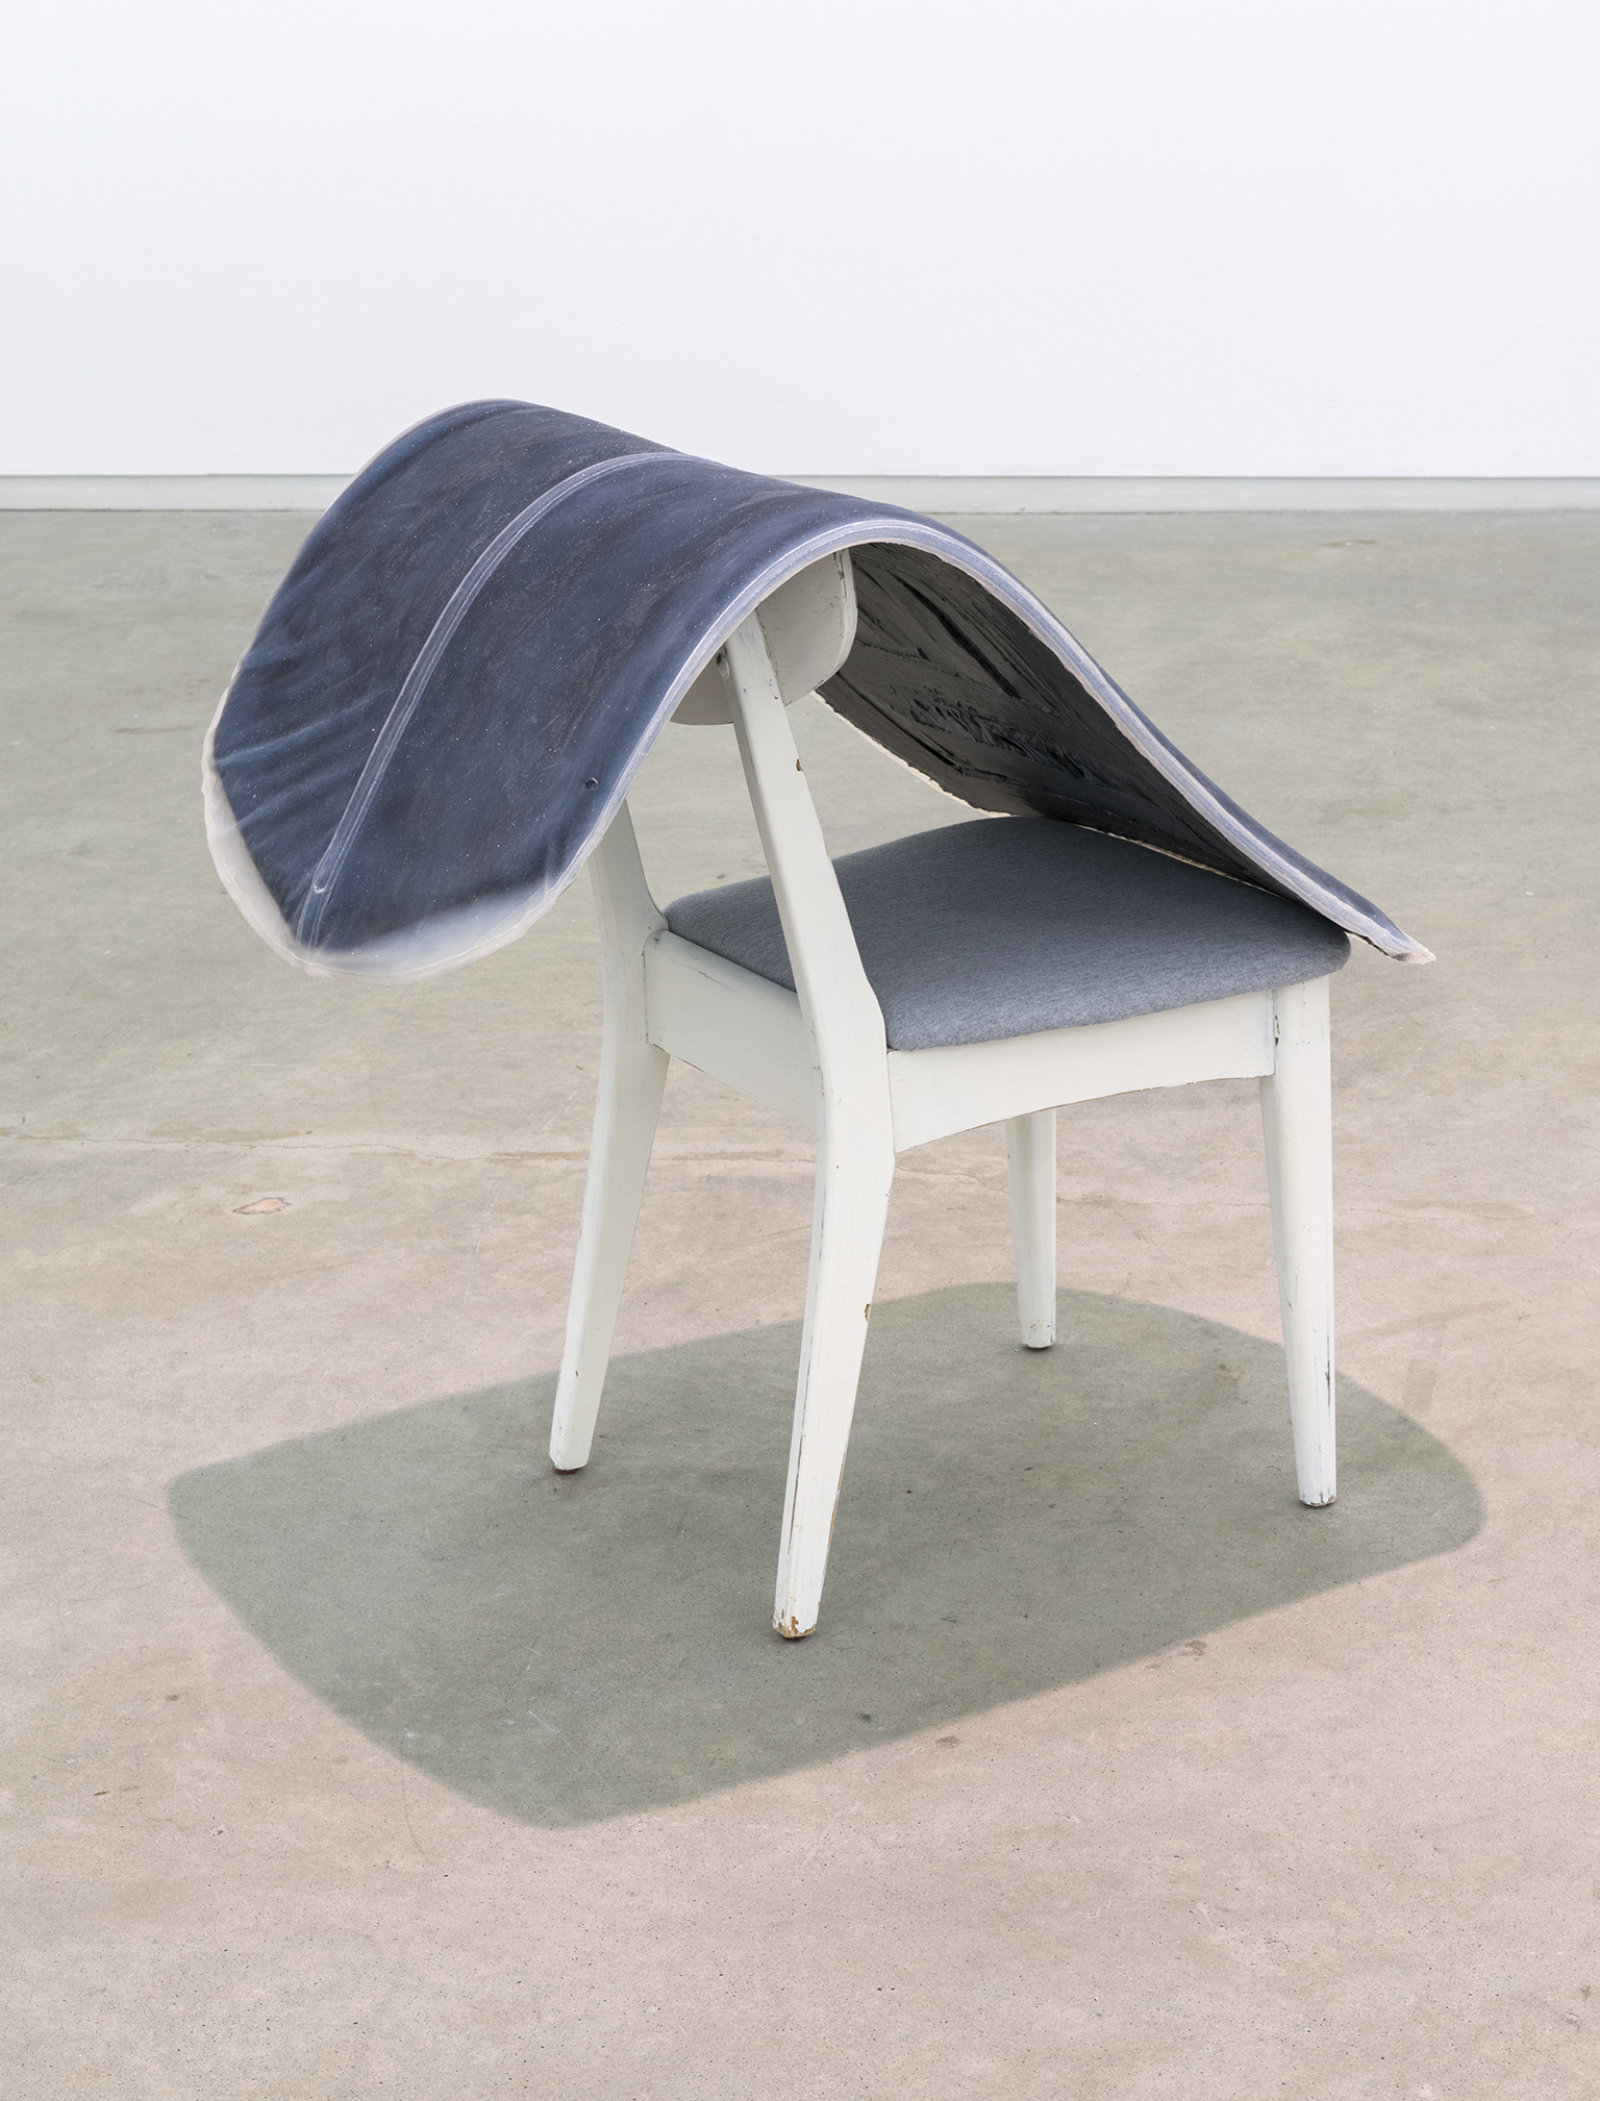 Liz Magor, Formal I, 2012, platinum-cure silicone rubber, chair, 32 x 24 x 32 in. (81 x 61 x 81 cm)